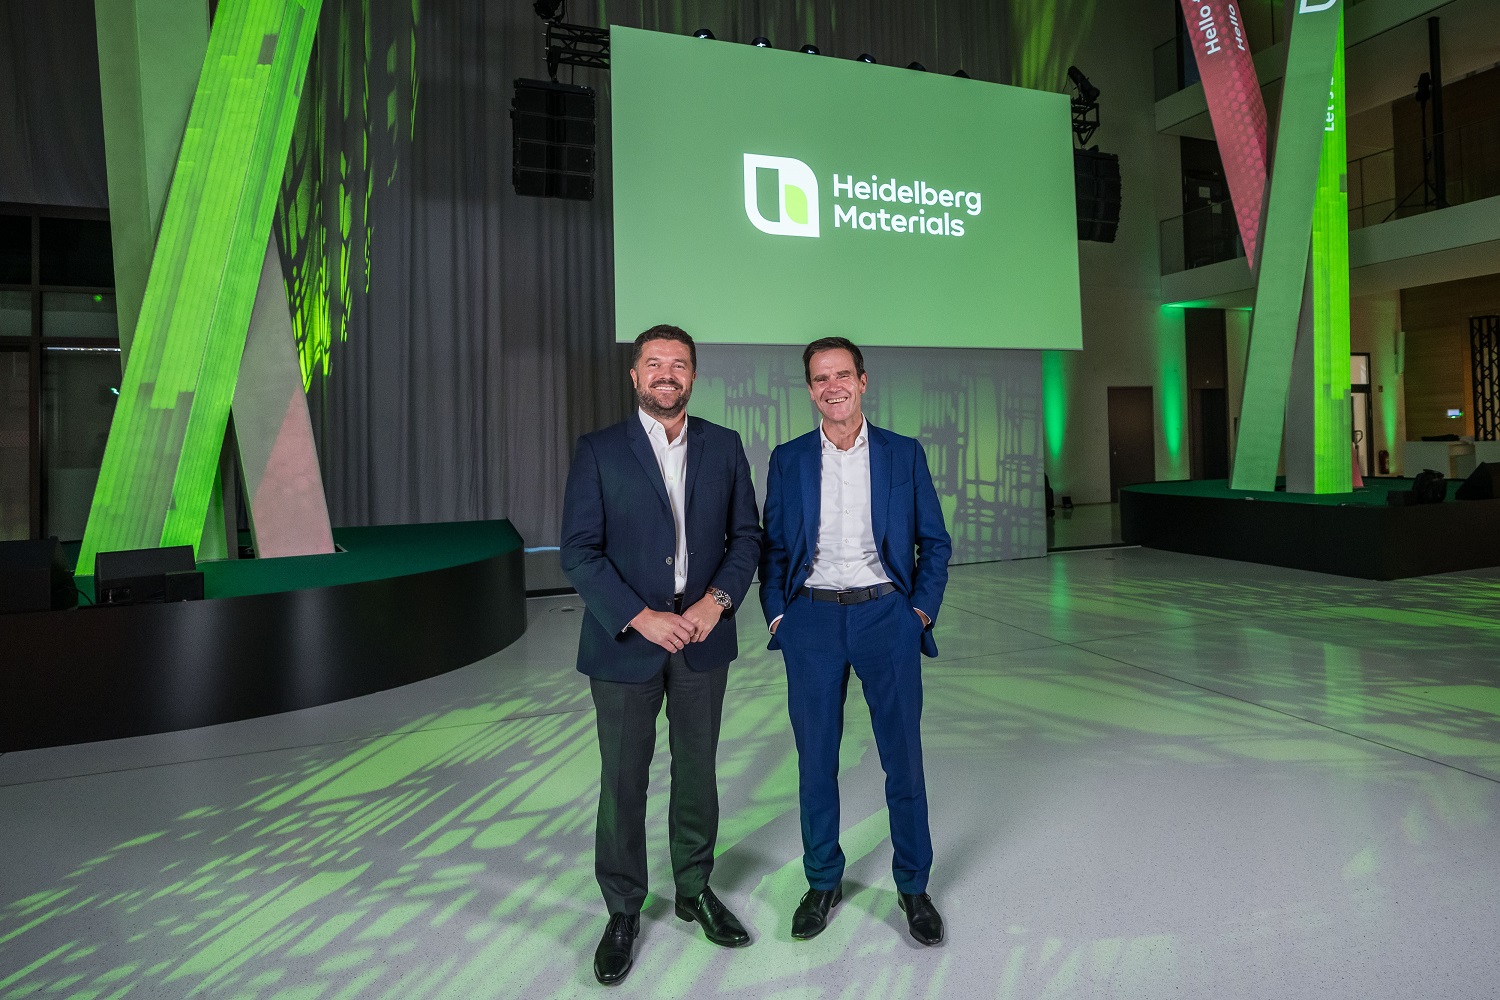  Jon Morrish, member of the managing board and responsible for the brand development, and Dominik von Achten, chairman of the managing board (from left), revealed the new brand at the company’s headquarters in Heidelberg